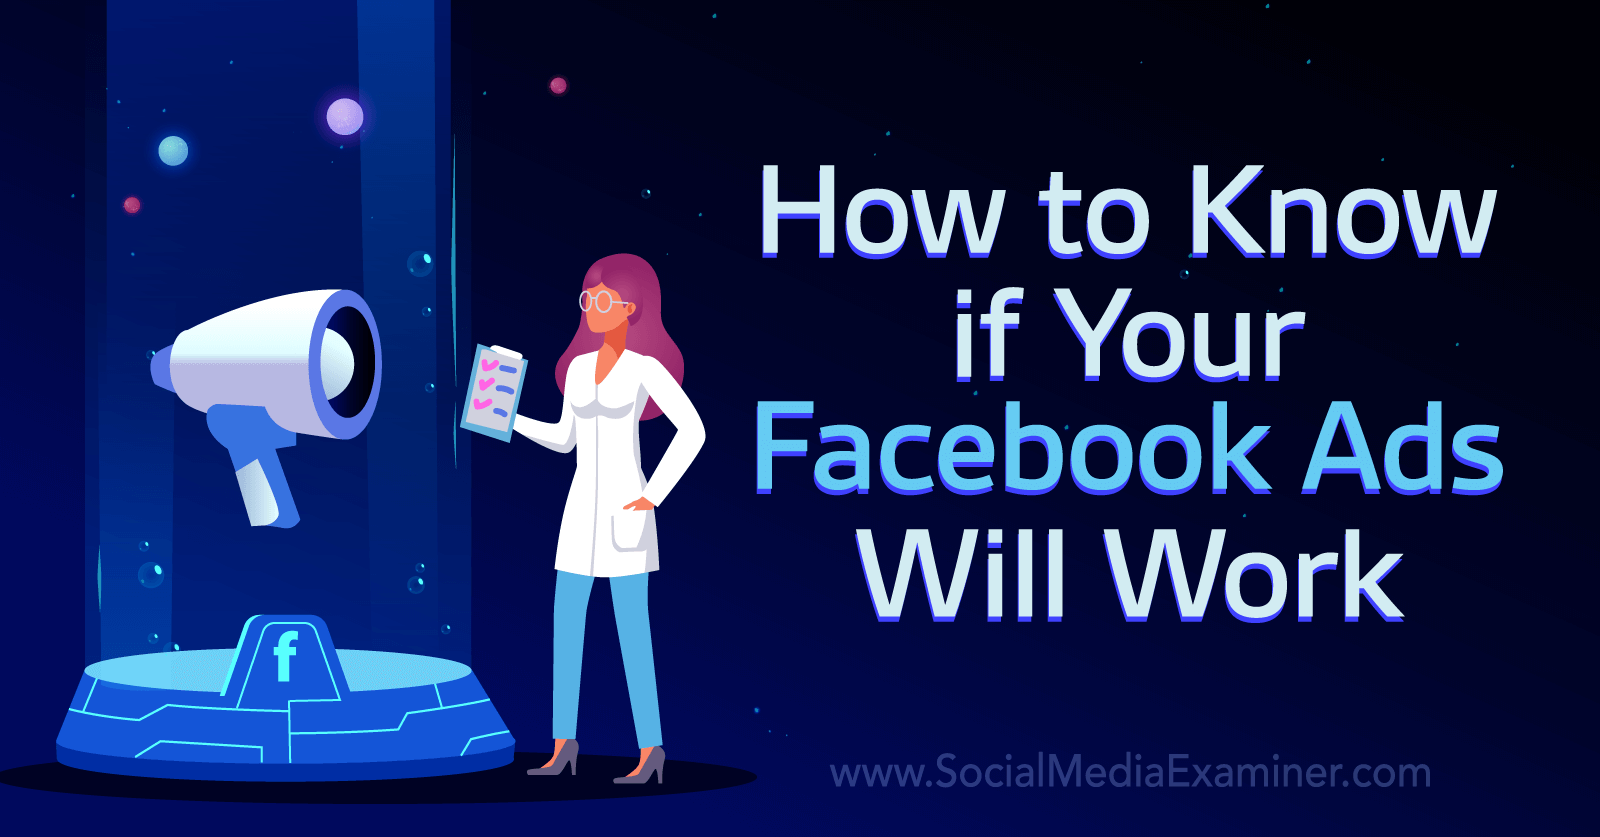 How to Know if Your Facebook Ads Will Work-Social Media Examiner